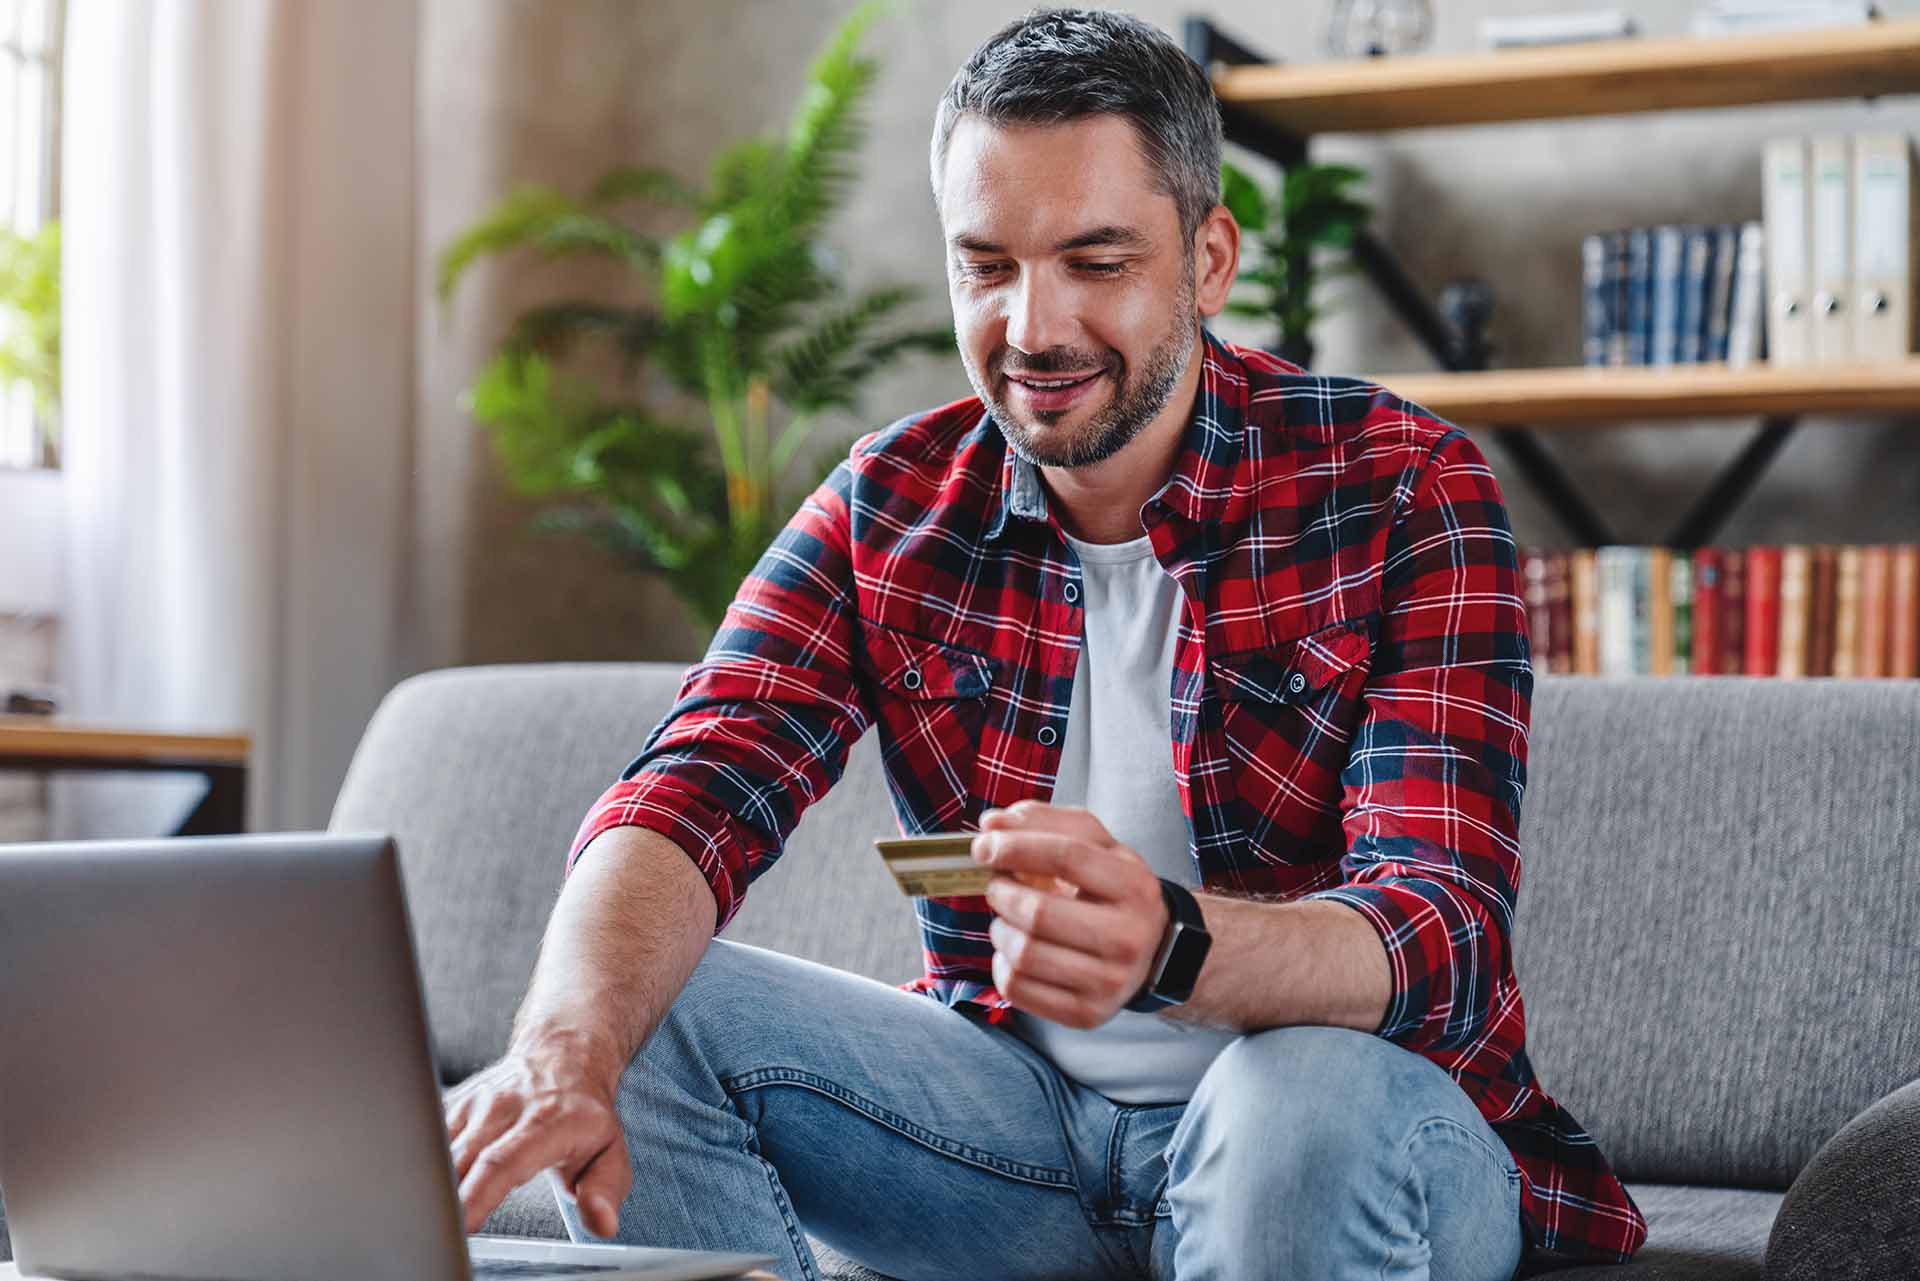 Hispanic male sitting on couch in home smiling and holding credit card while using laptop